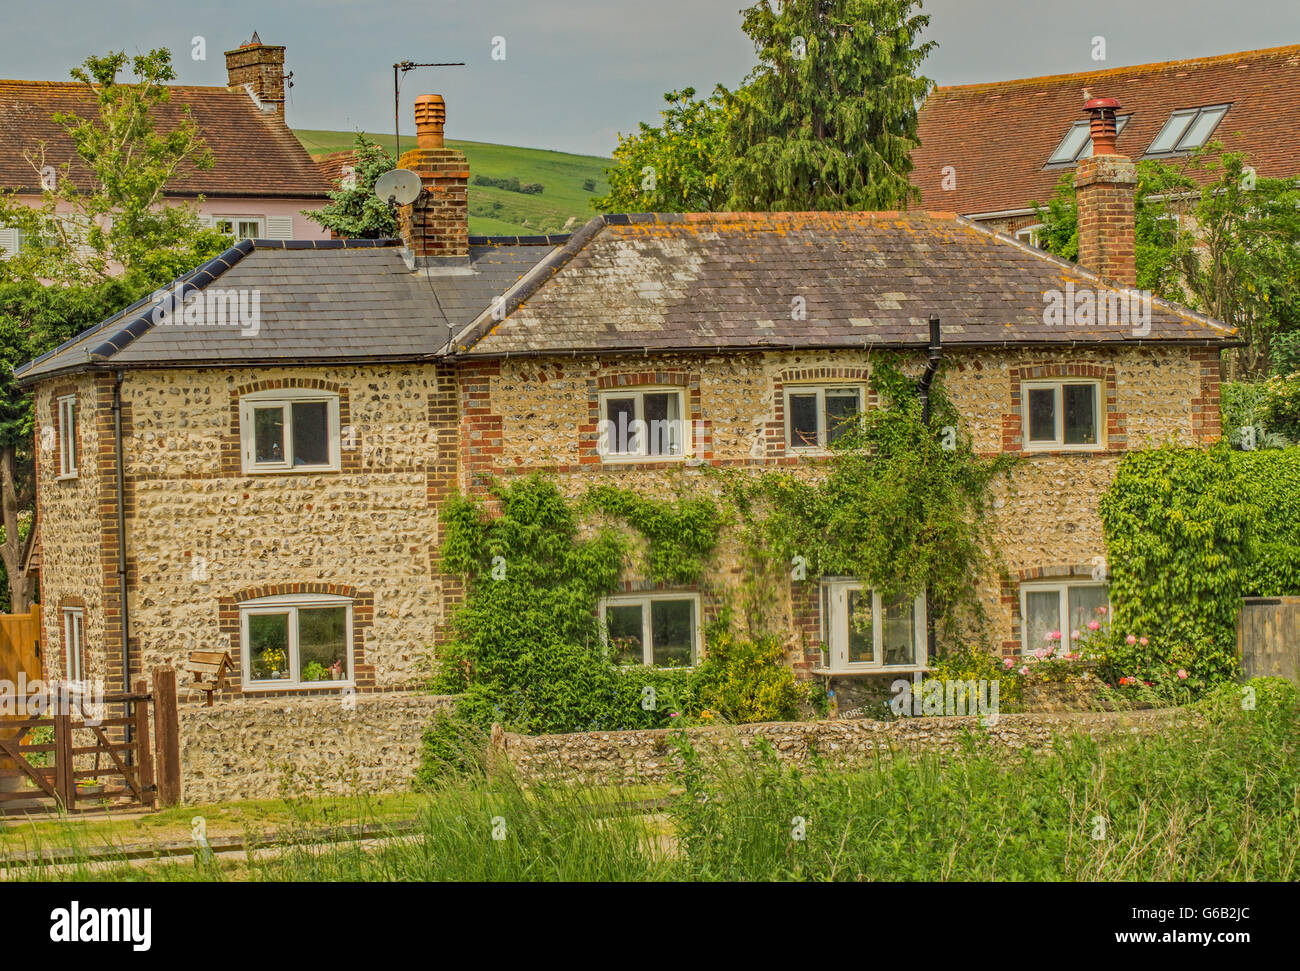 An English Country Stone House in a rural village Stock Photo